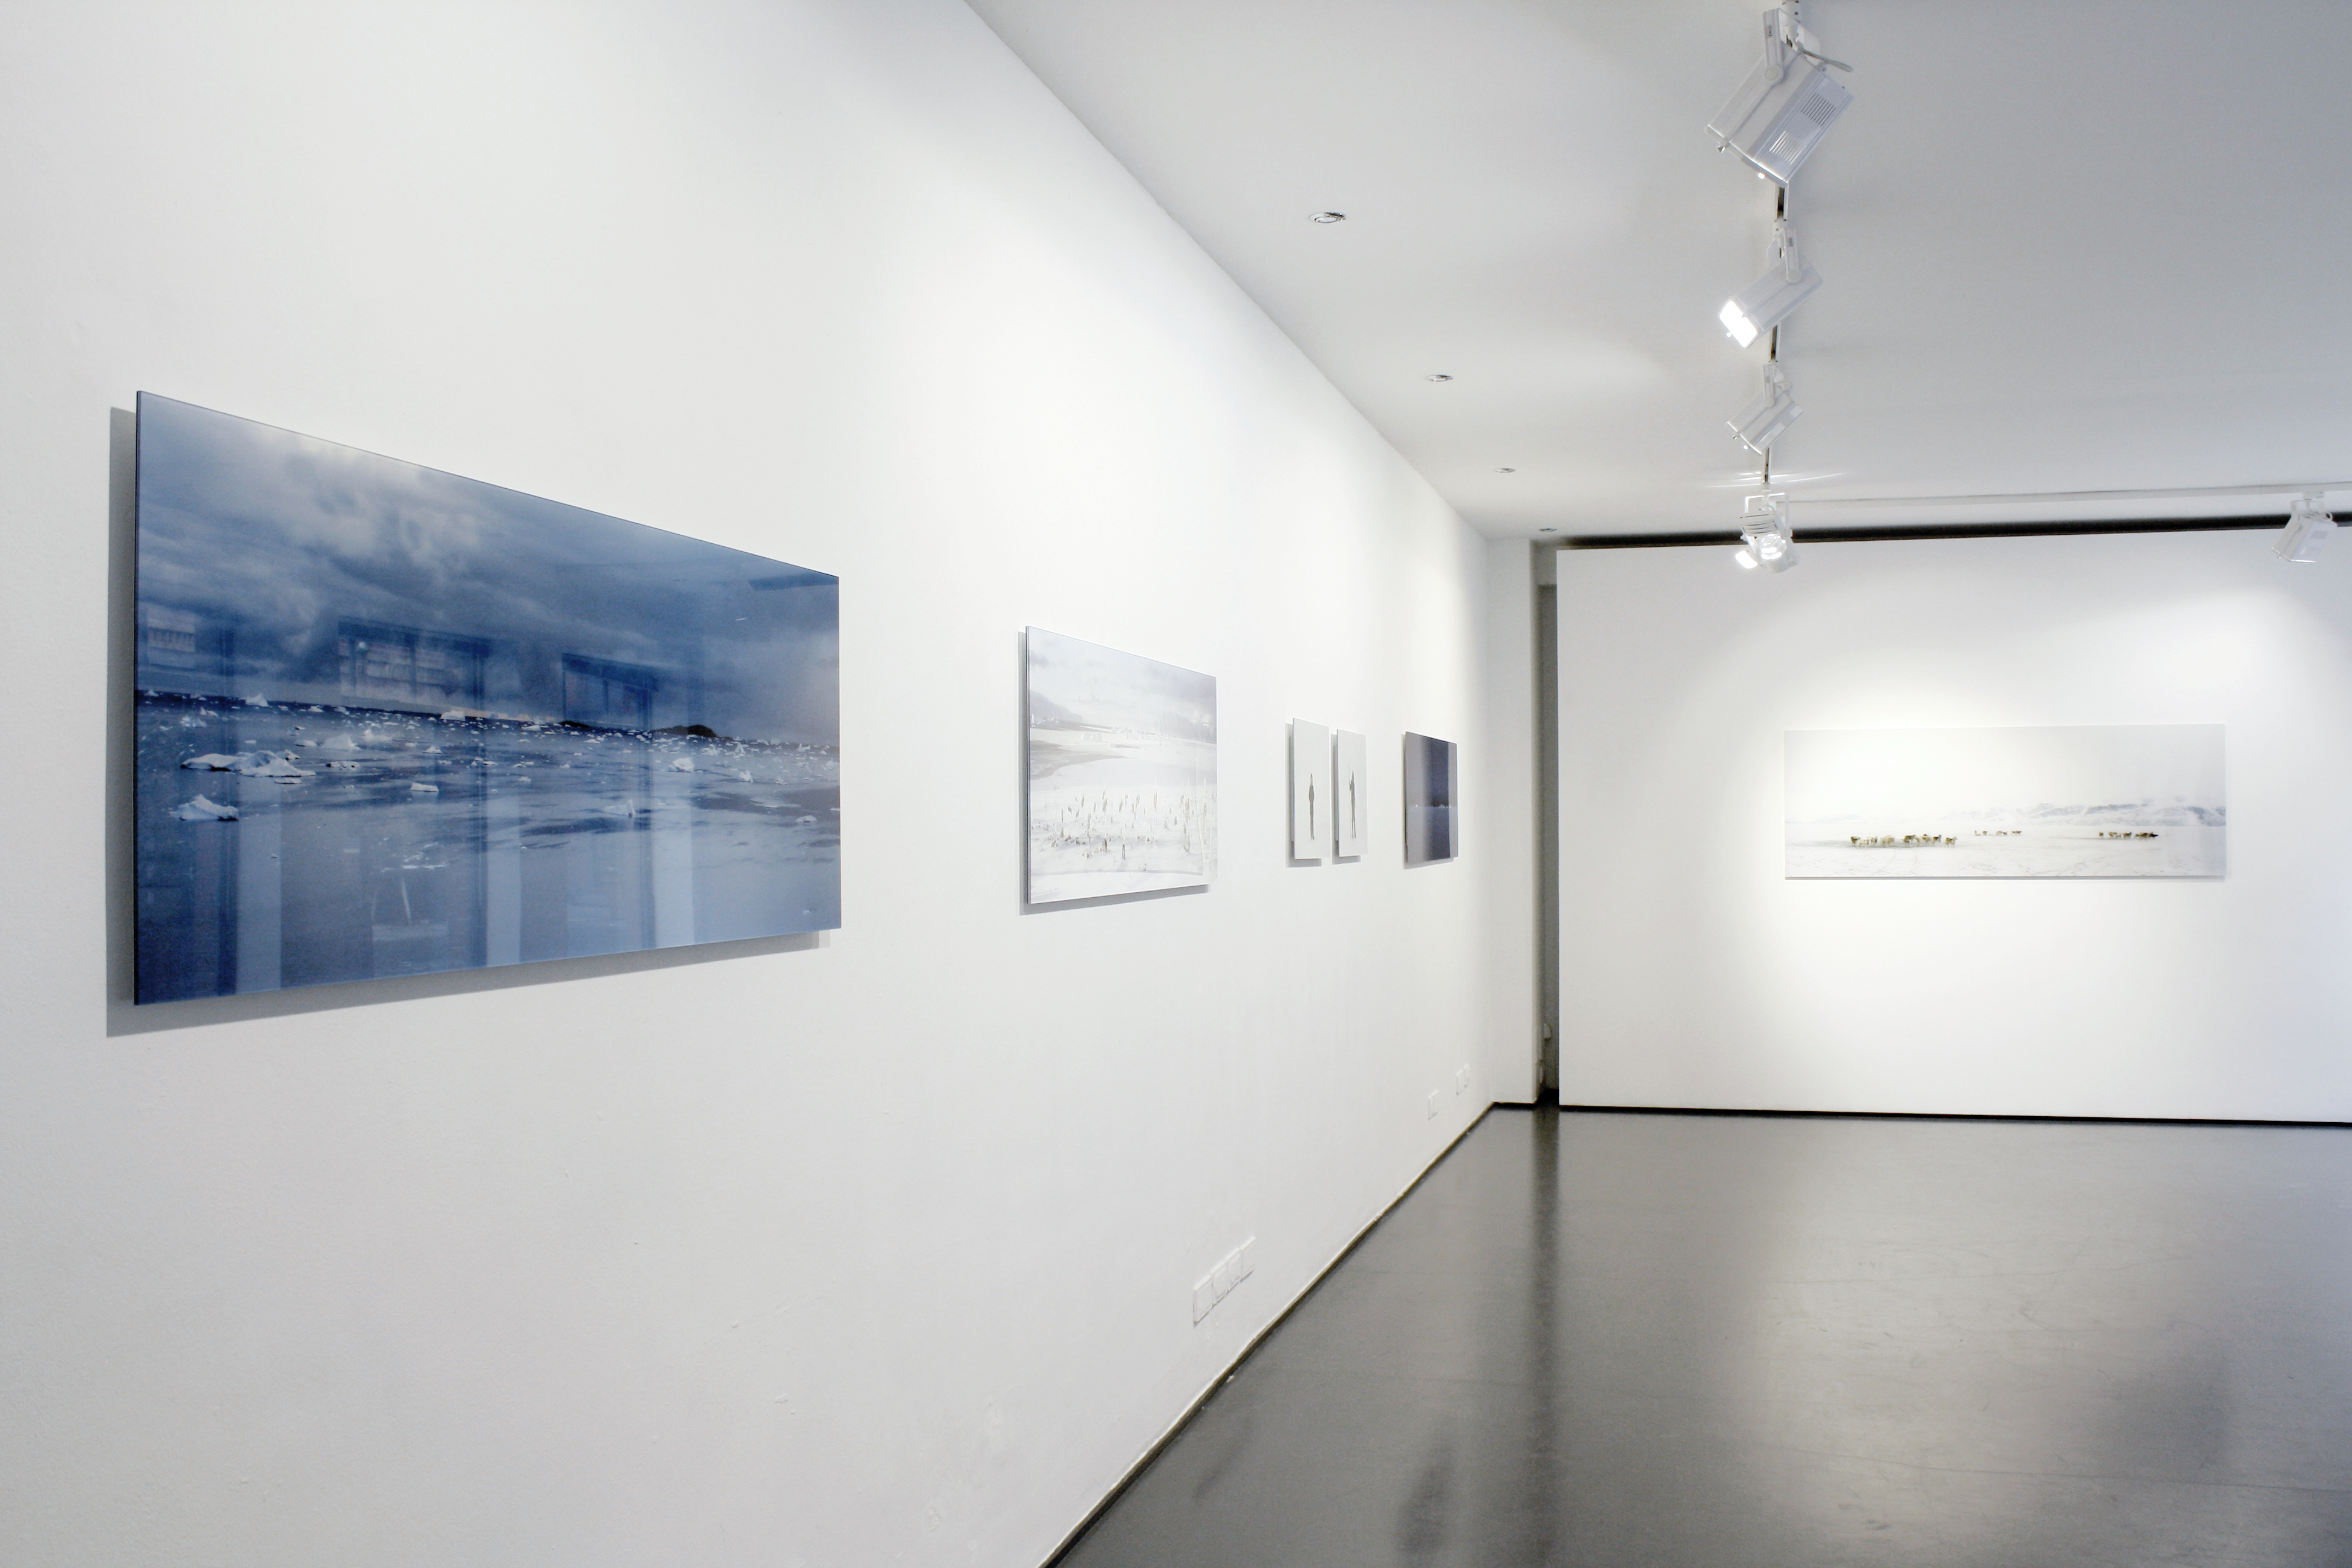 Installation View at Gallery Taik, Berlin, Germany 2013